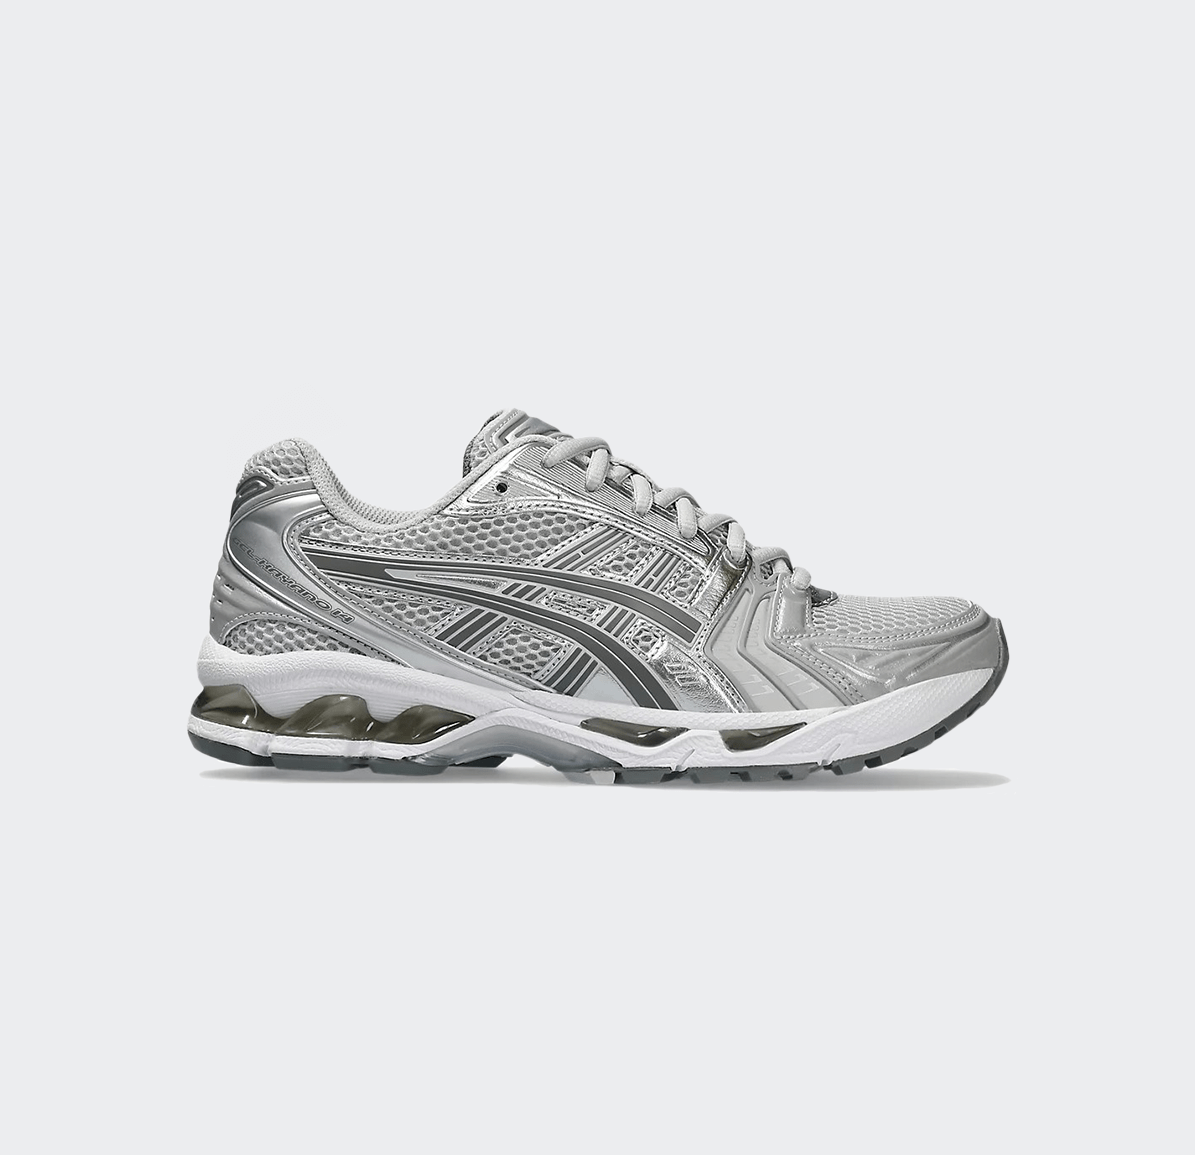 Asics SportStyle Gel Kayano 14 - Cloud Grey/Clay Grey - Asics SportStyle - State Of Play